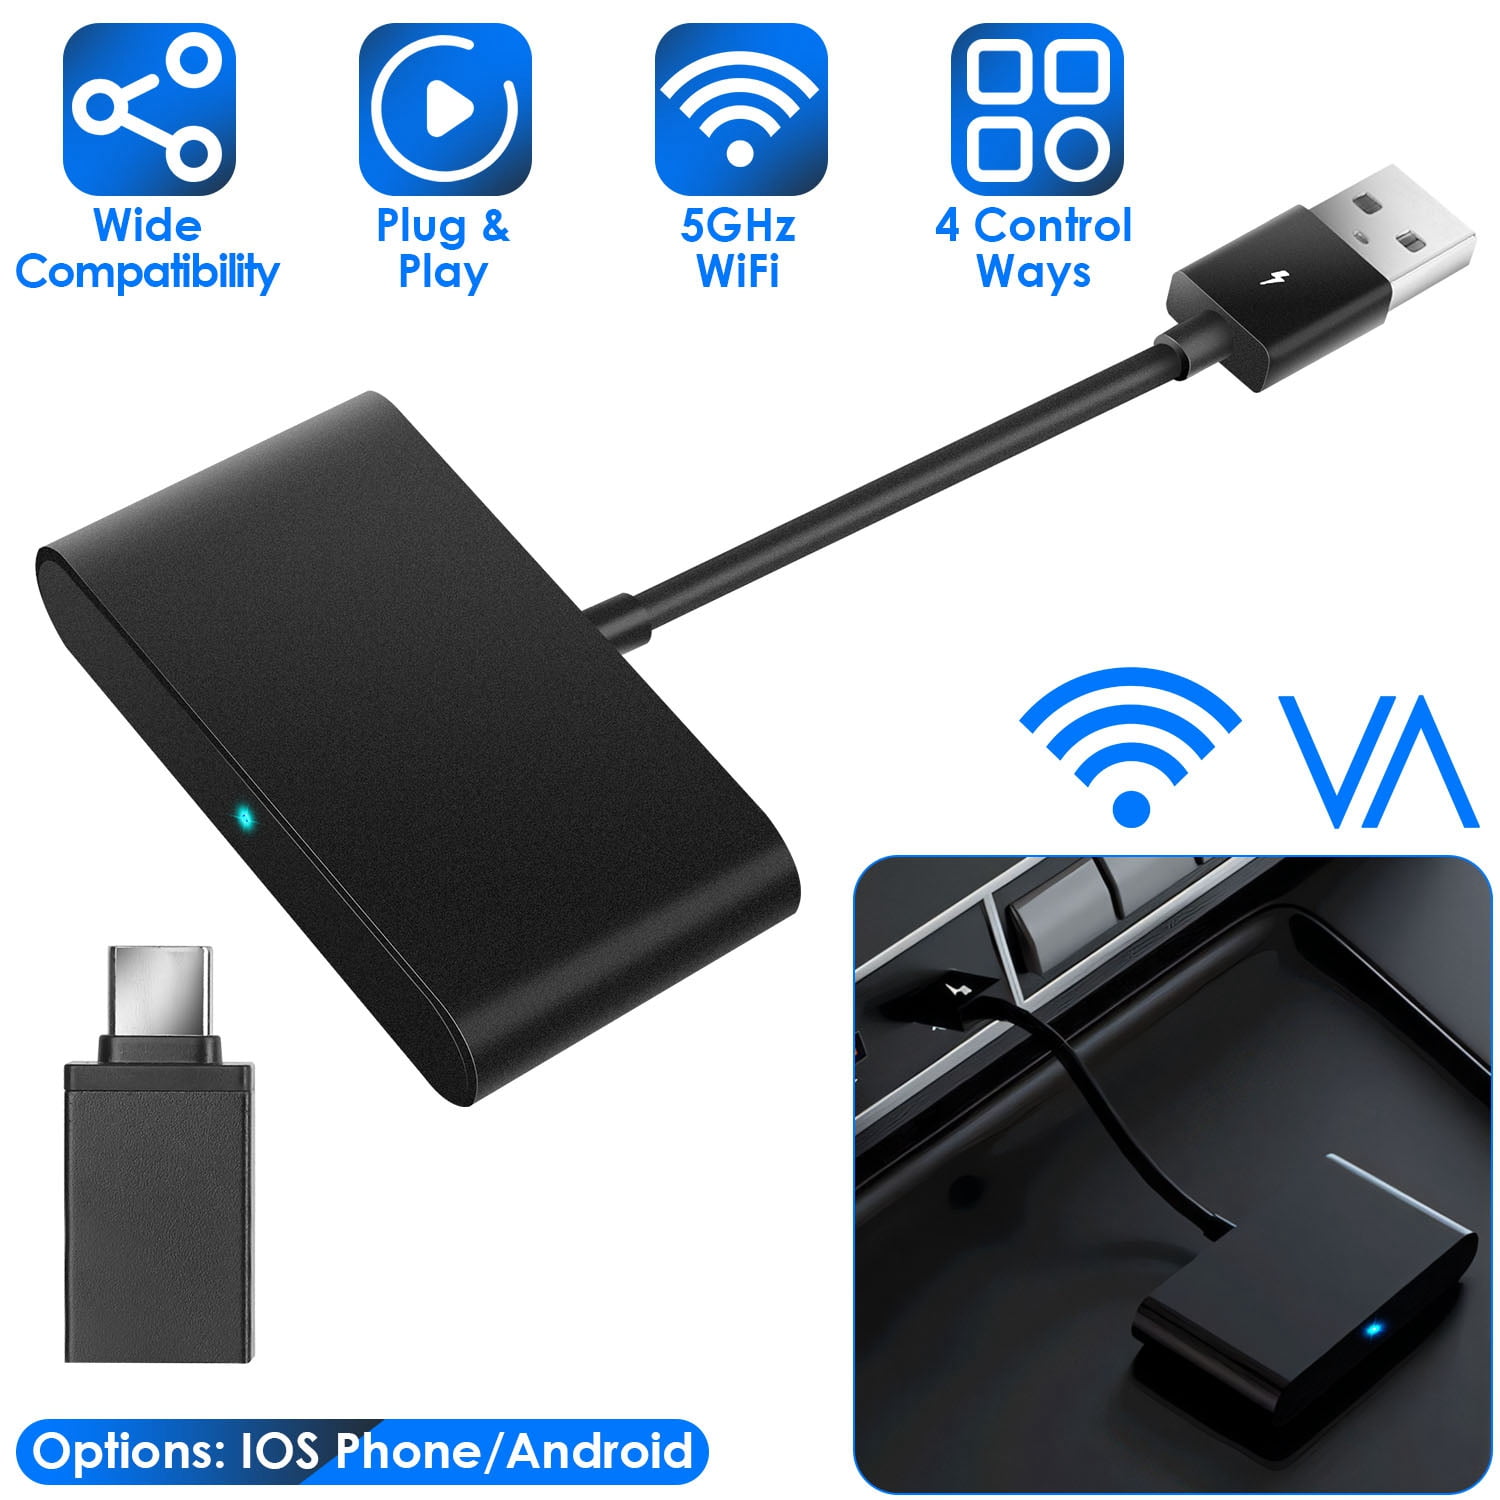 Adaptateur sans Fil Android Auto, 5GHZ Adaptateur Wireless Android